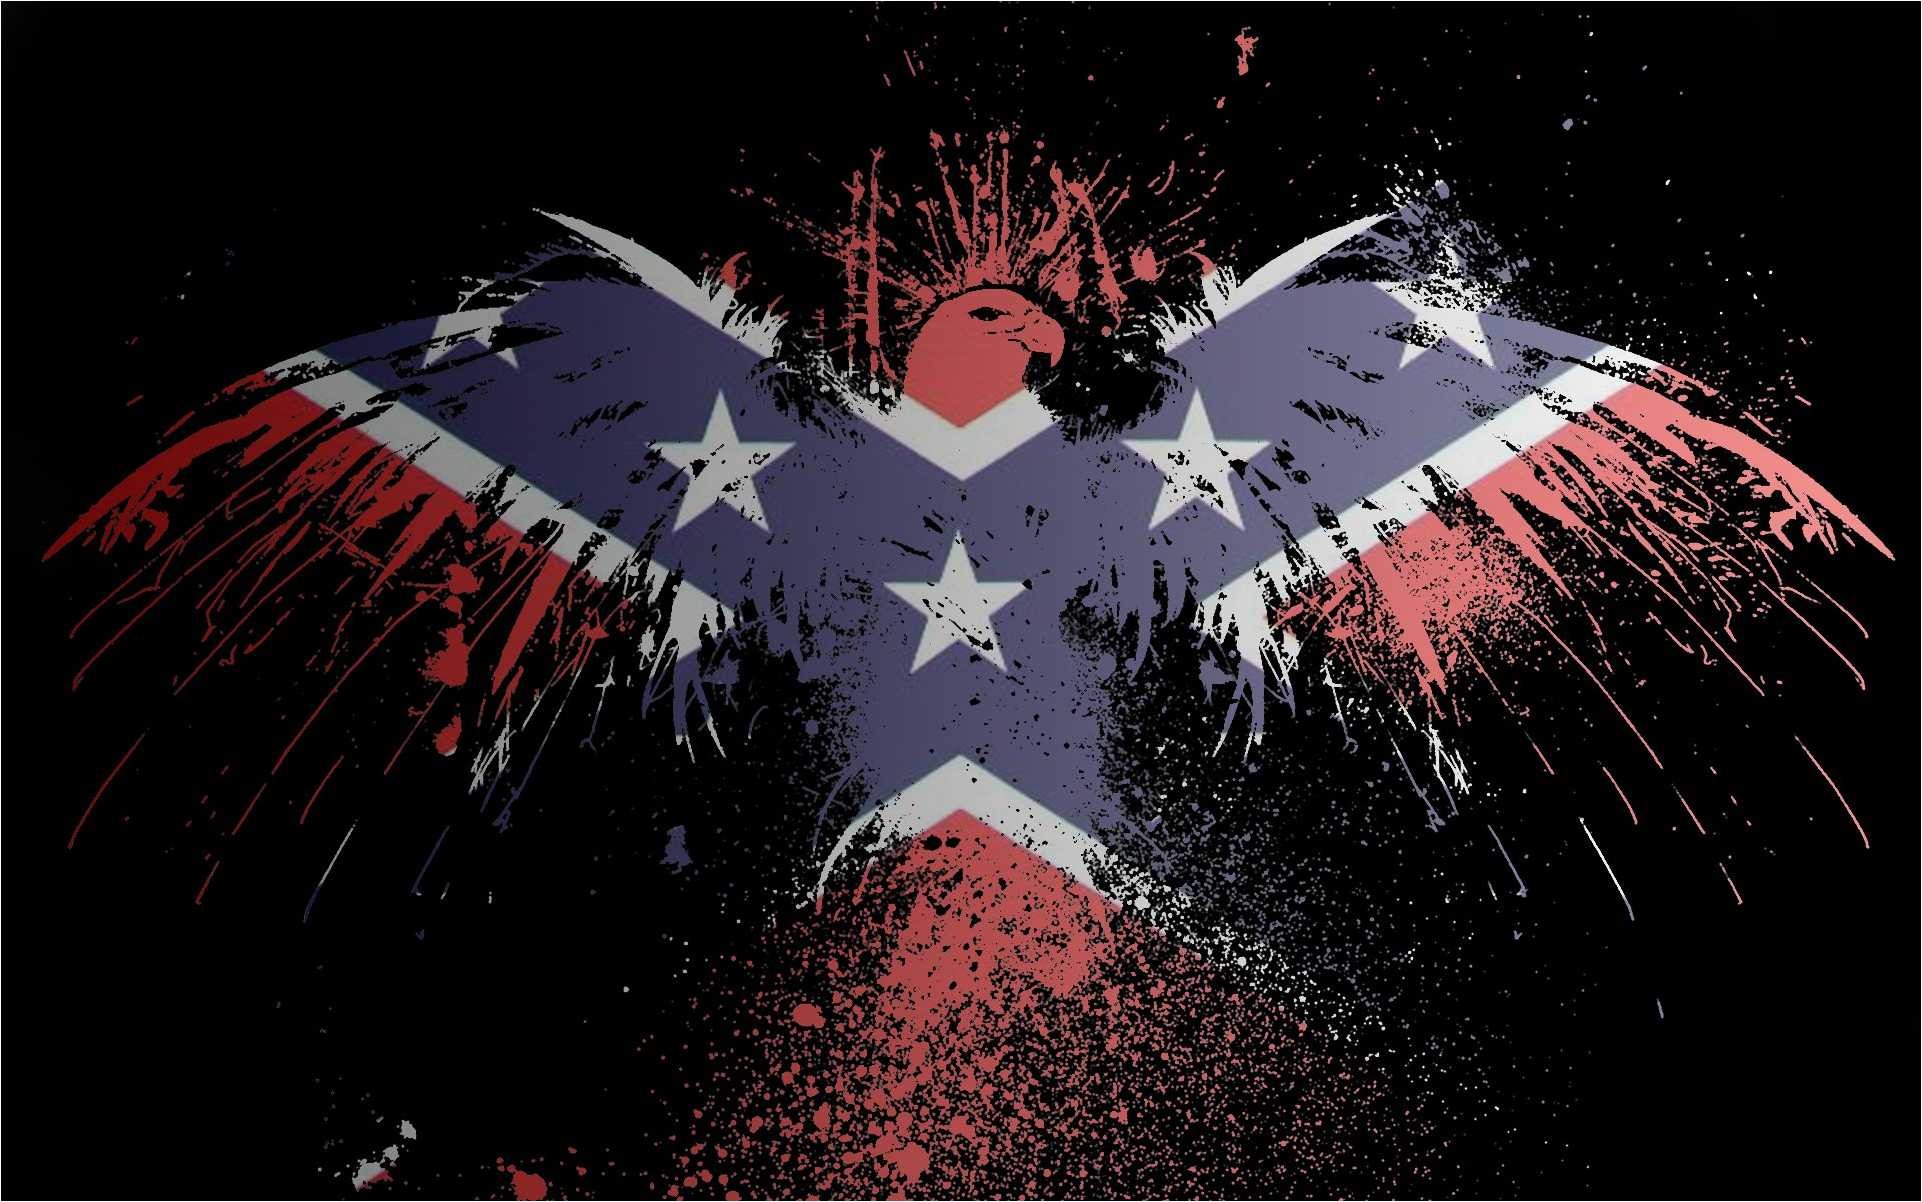 1922x1202 100% Quality HD Confederate Flag Wallpapers Widescreen, MR.827